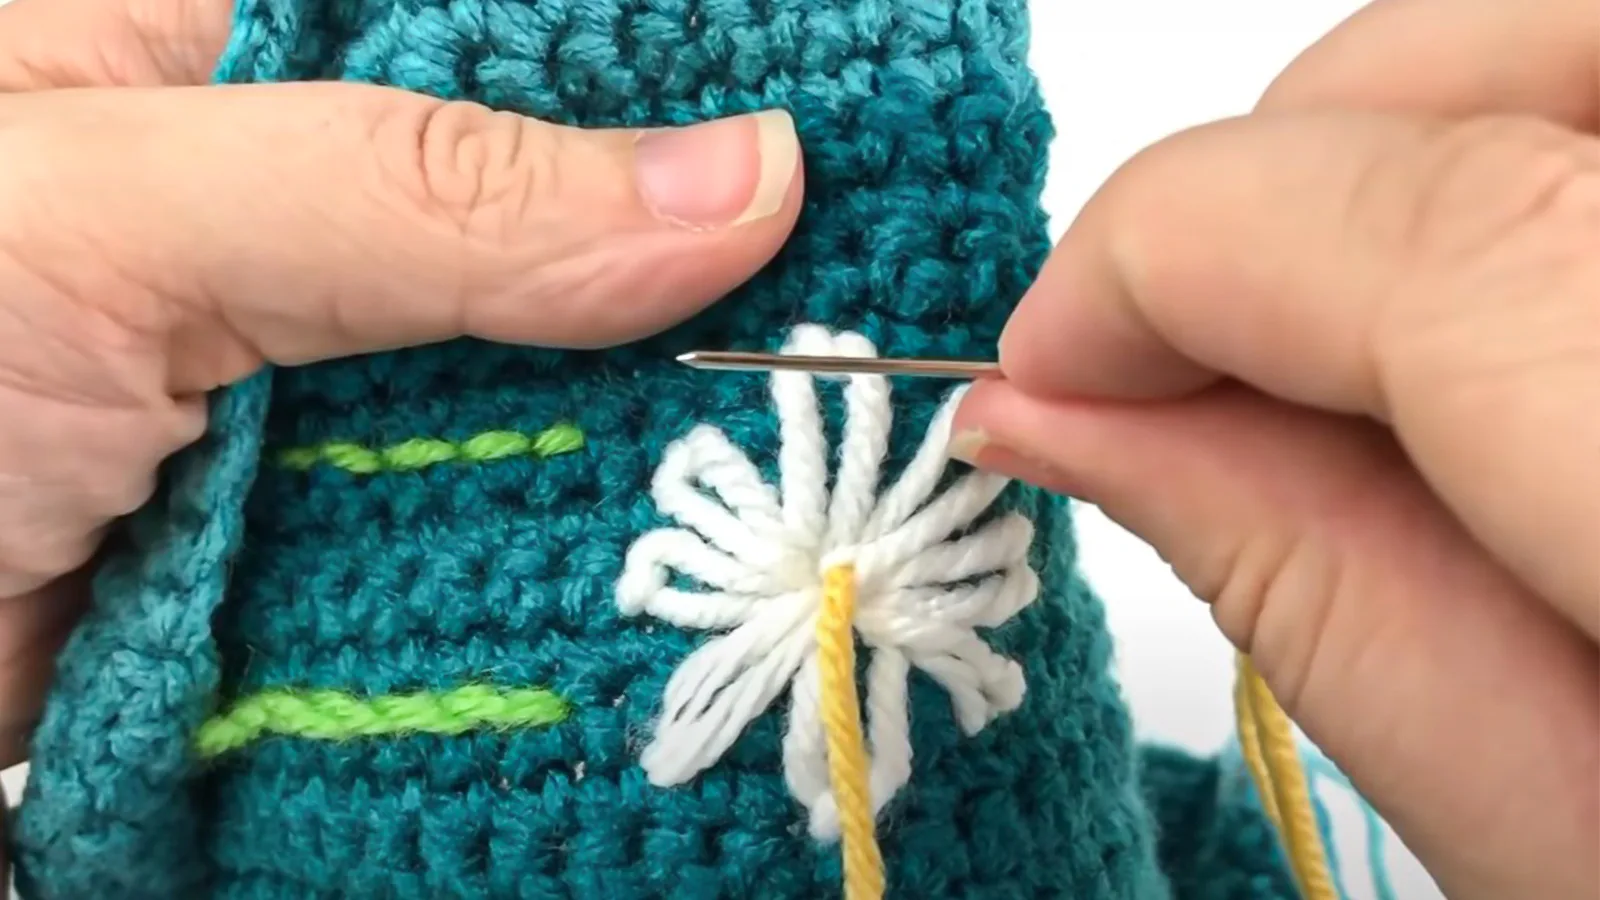 How to Embroider on Crochet: Tips for Embroidery on Crochet